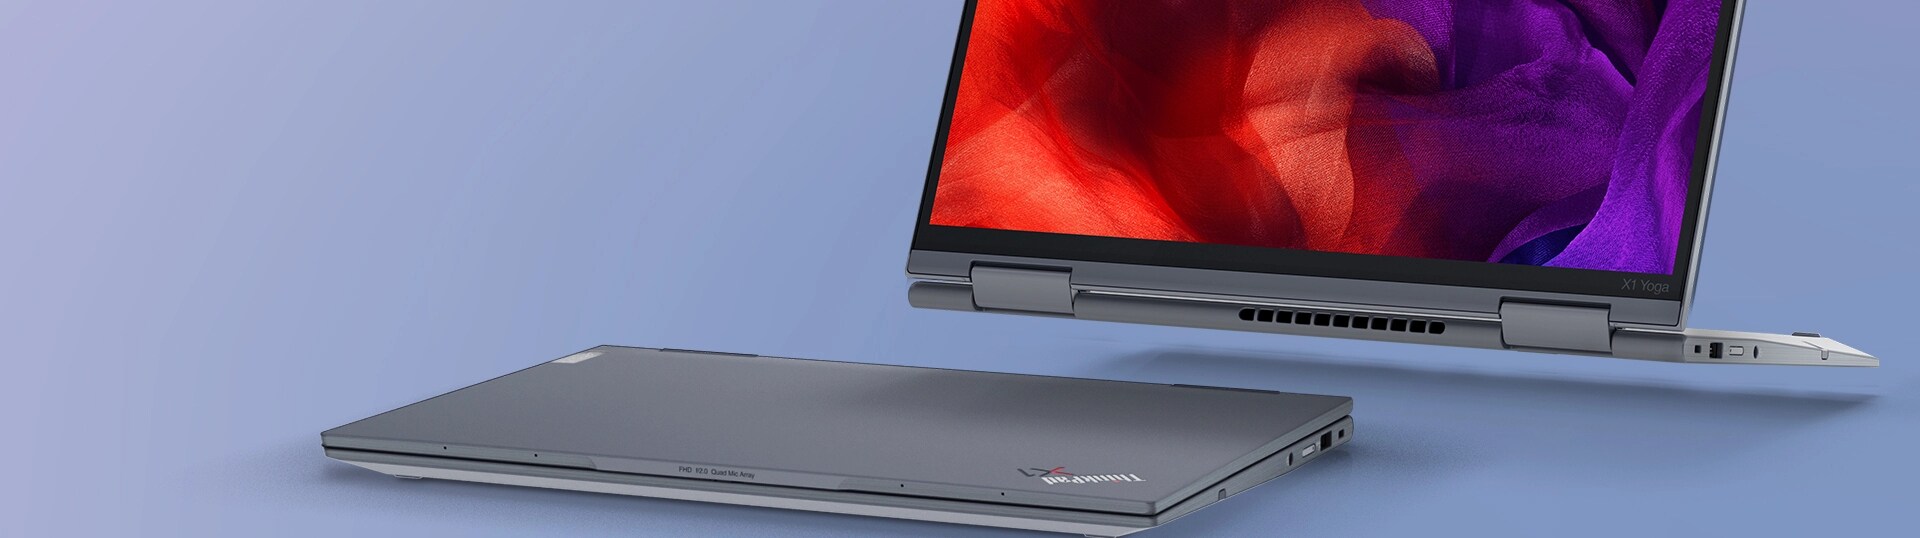 ThinkPad X1 Yoga Gen 8 laptop closed and laptop with lid flipped up in tablet position